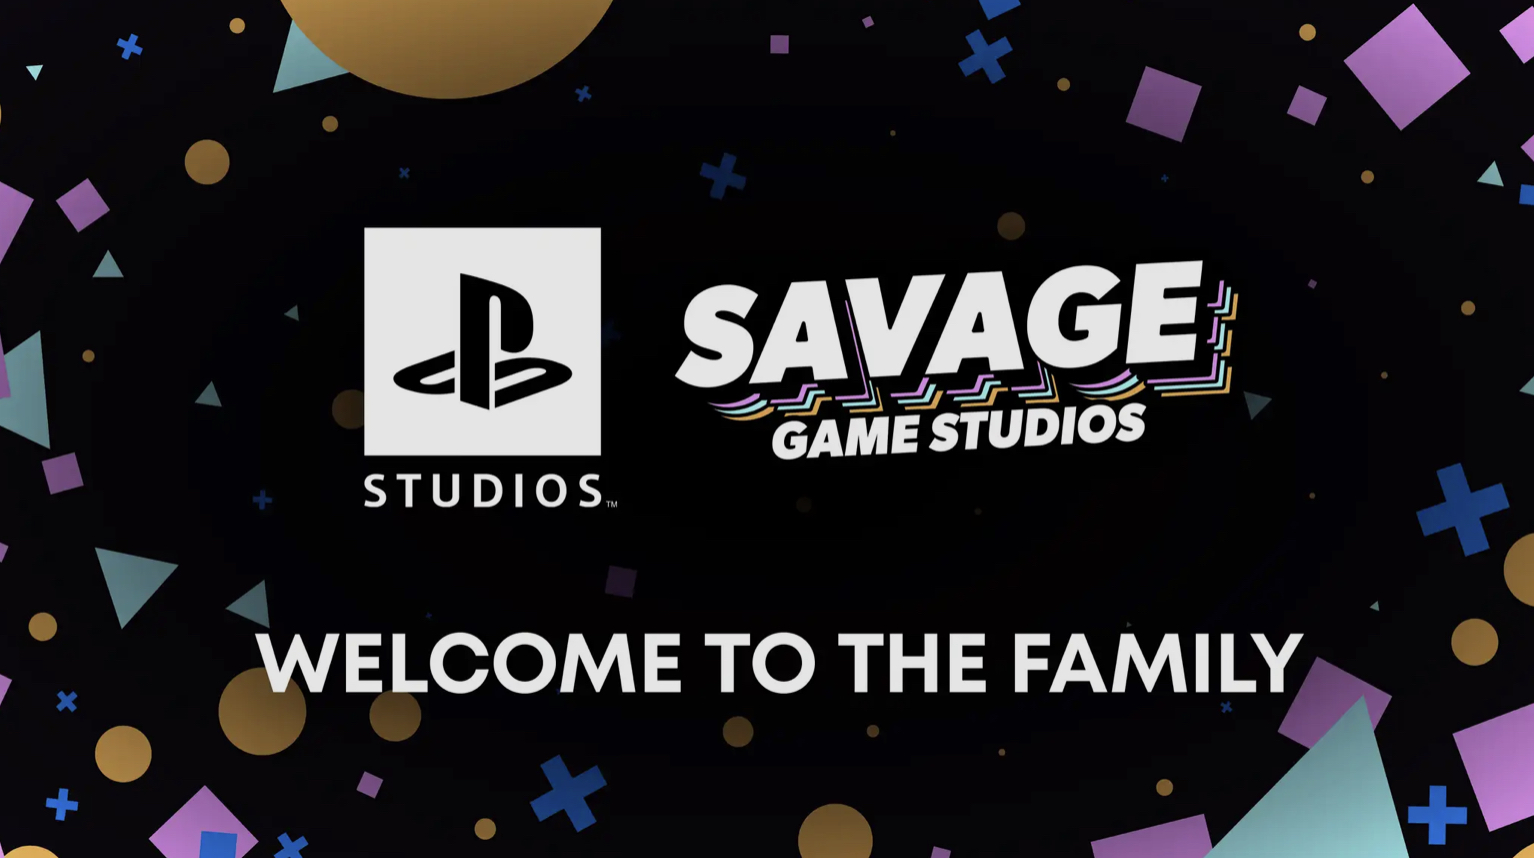 PlayStation To Acquire Savage Game Studios for Newly Created PlayStation Studios Mobile Division